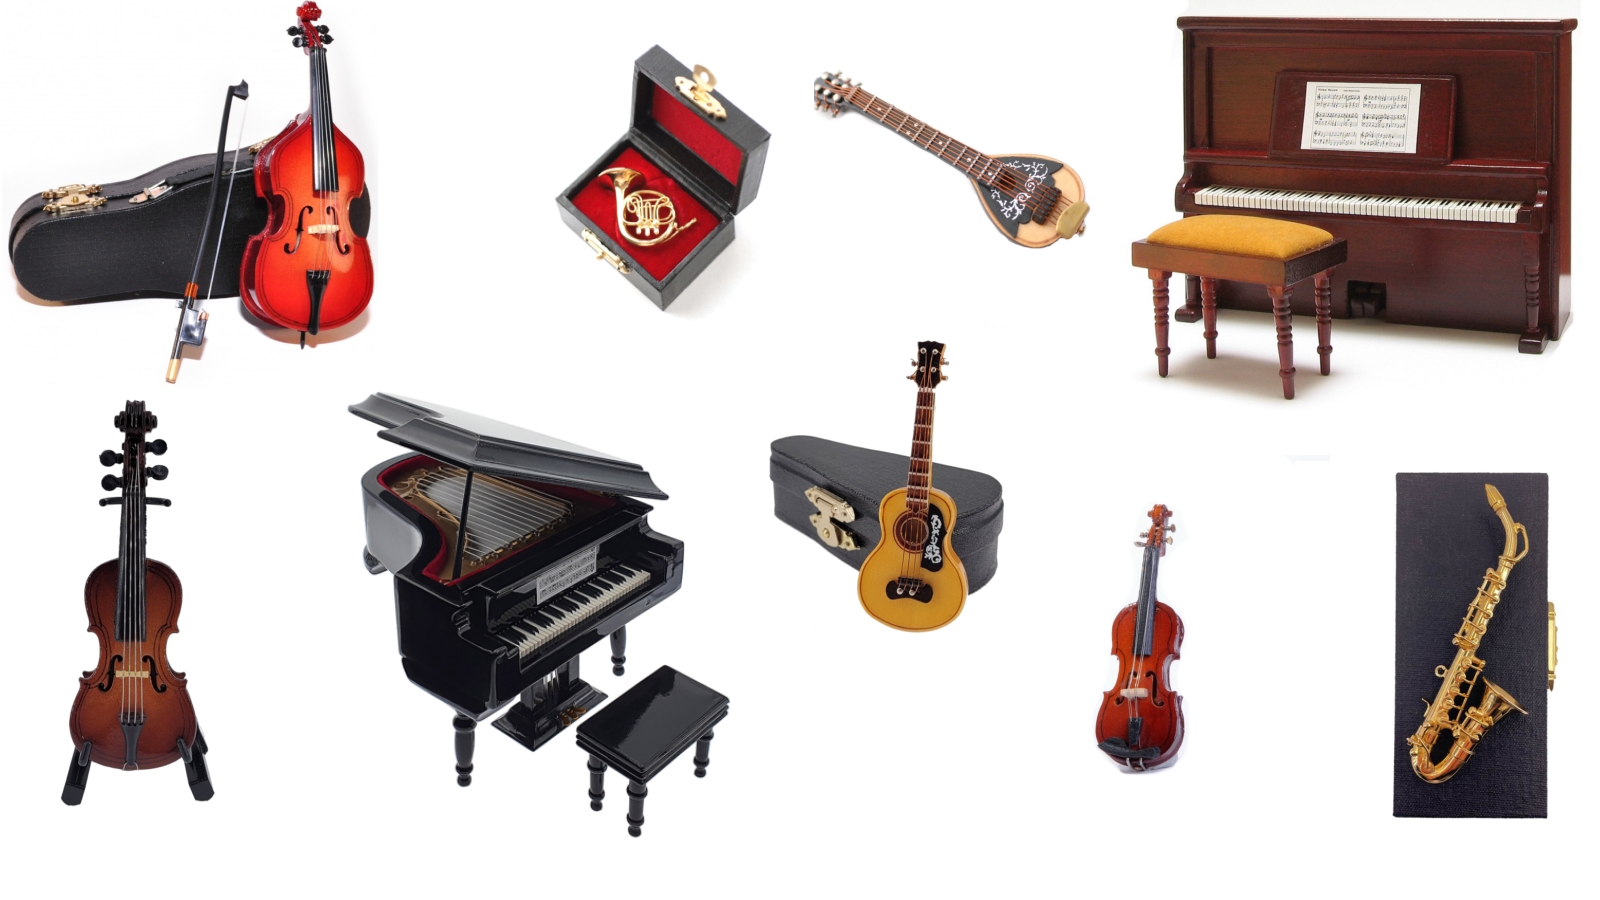 Discover the musical world of our miniatures